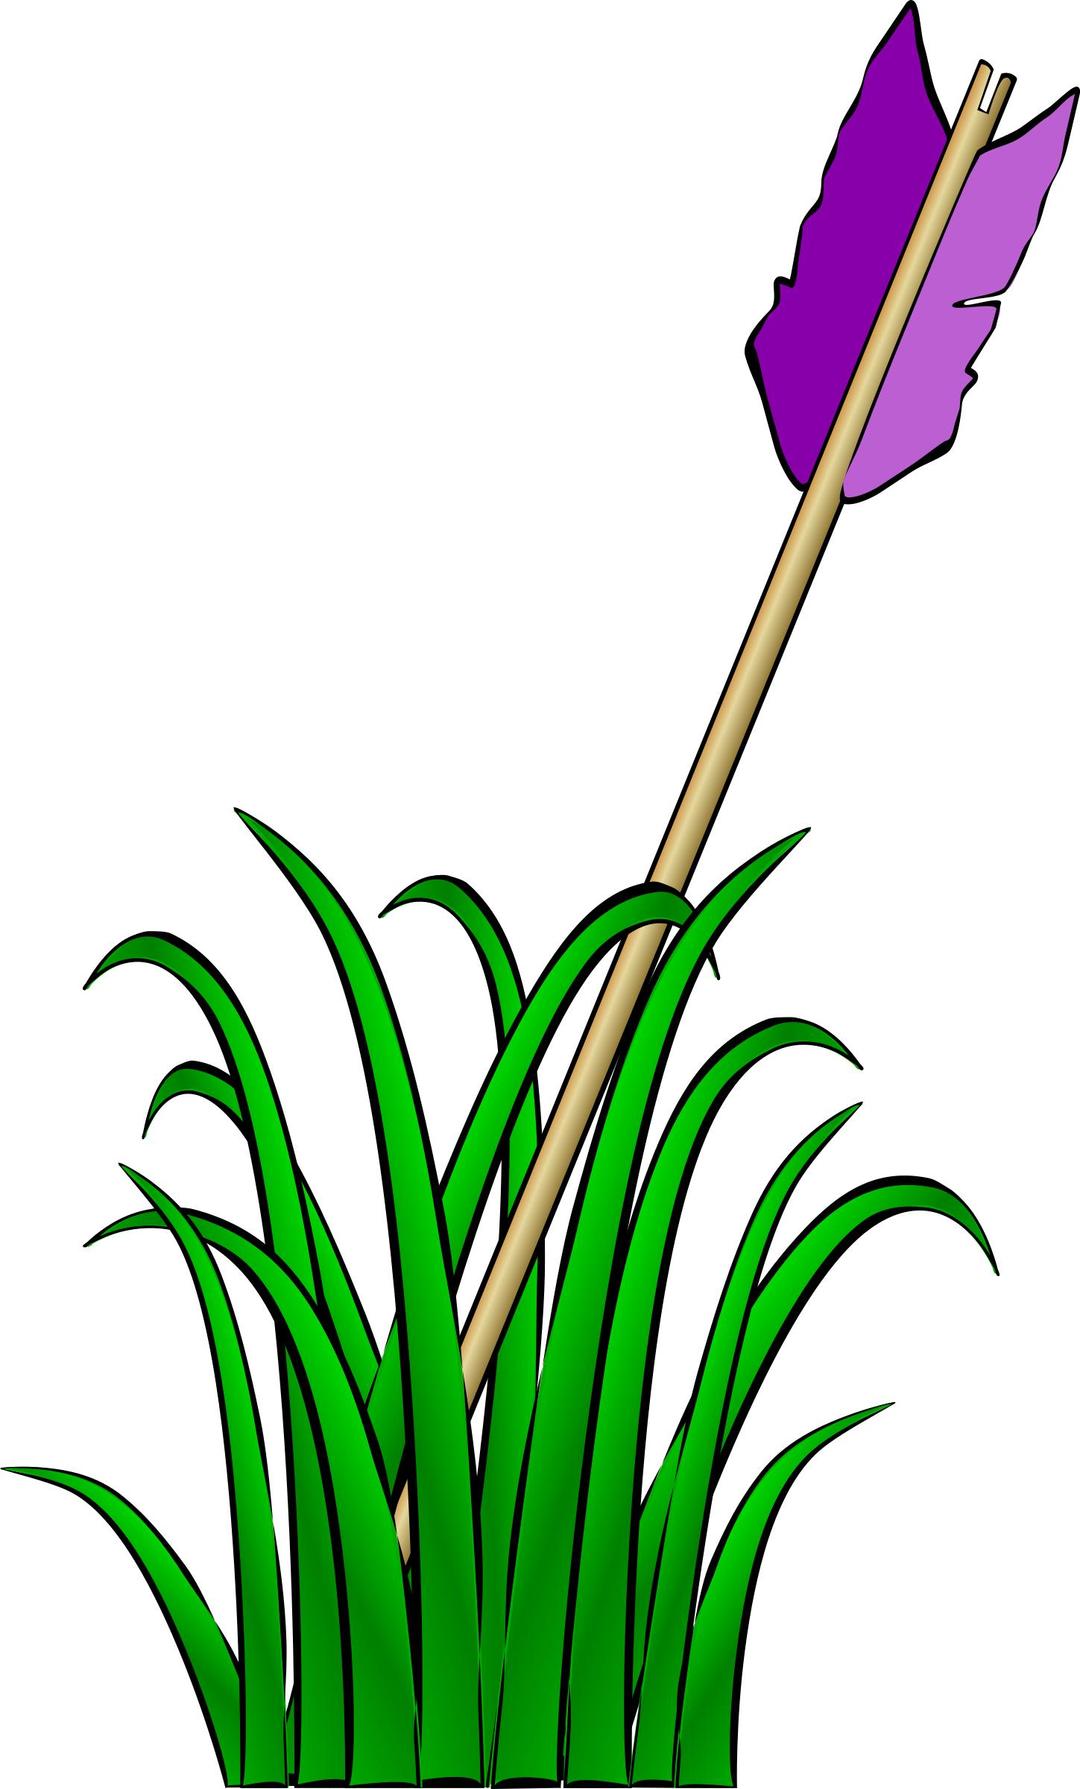 Arrow in the grass png transparent